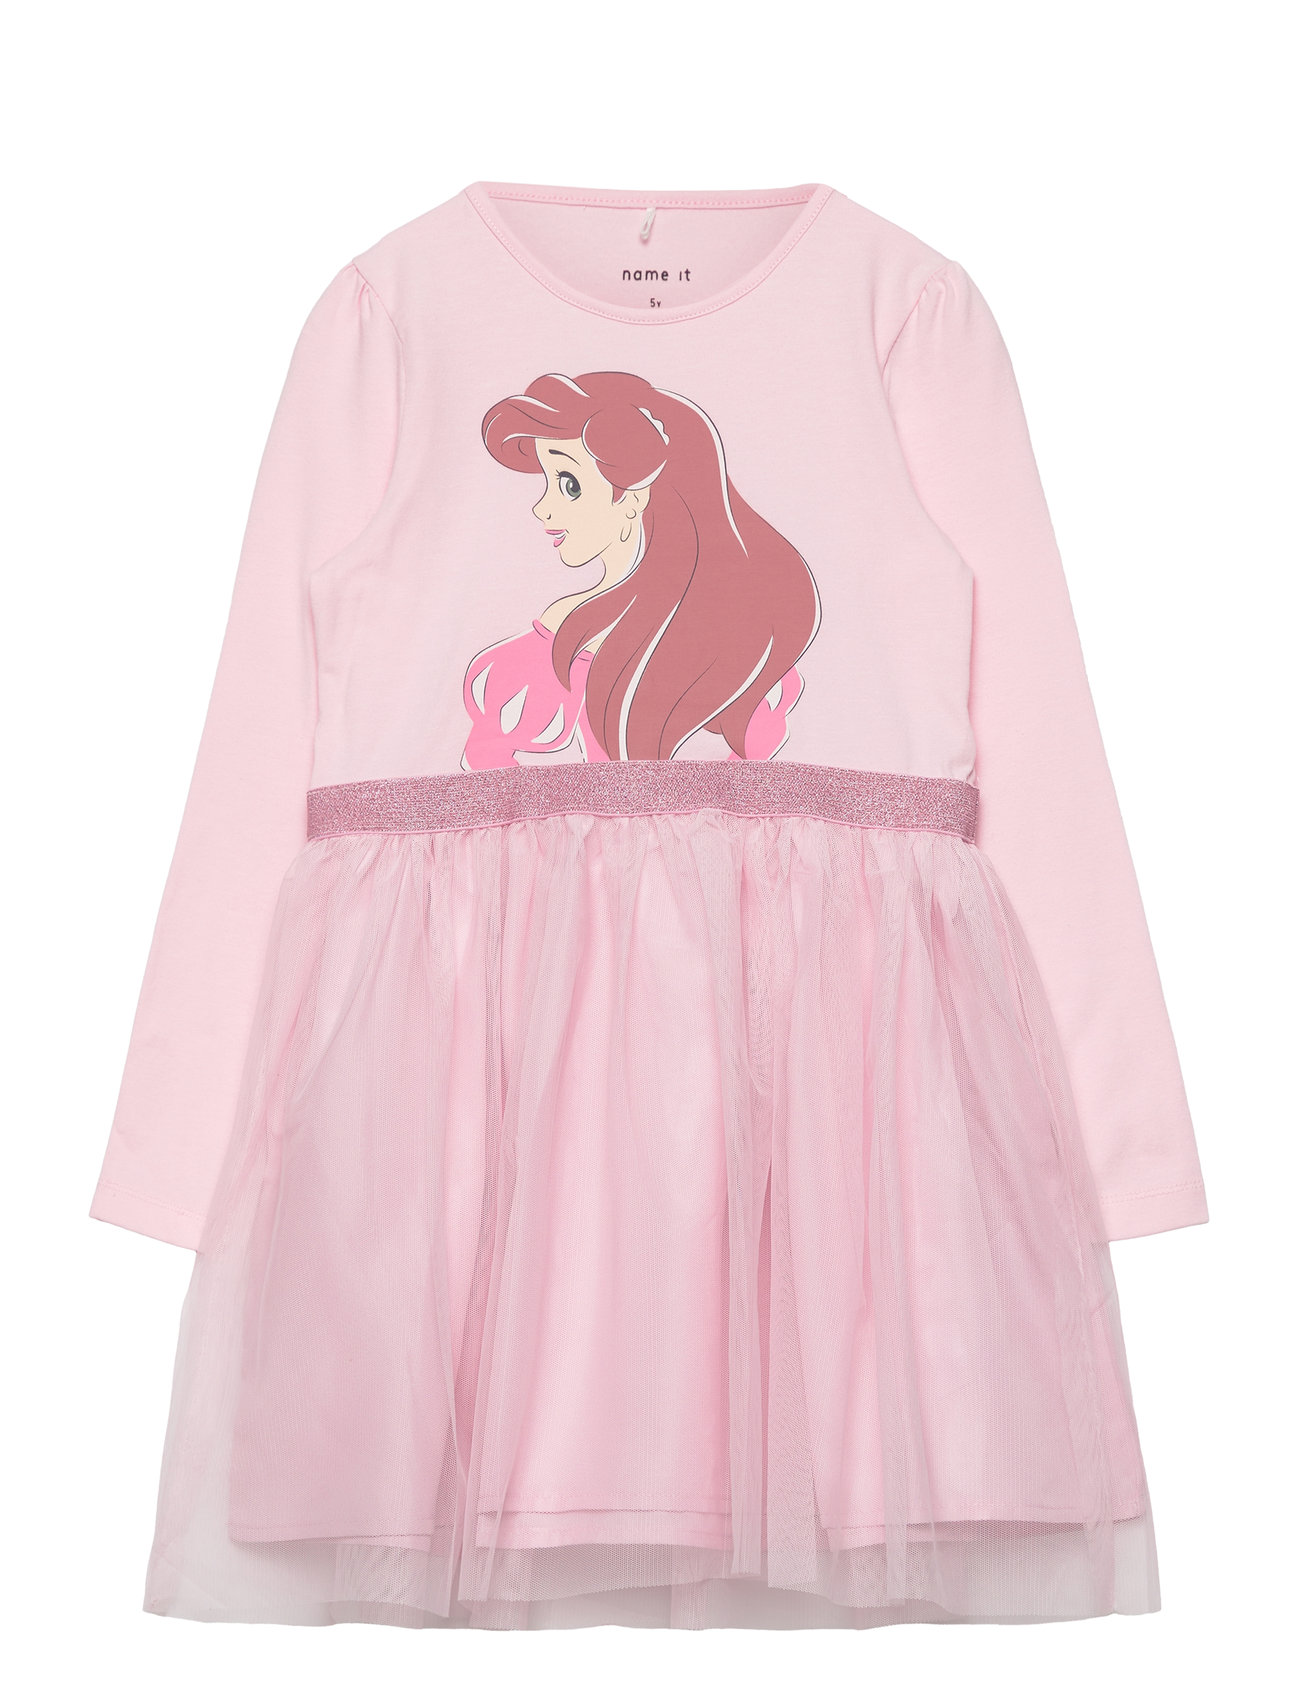 Nmfsalina Princes Ls Tulle Dress Box Wdi Dresses & Skirts Dresses Casual Dresses Long-sleeved Casual Dresses Pink Name It